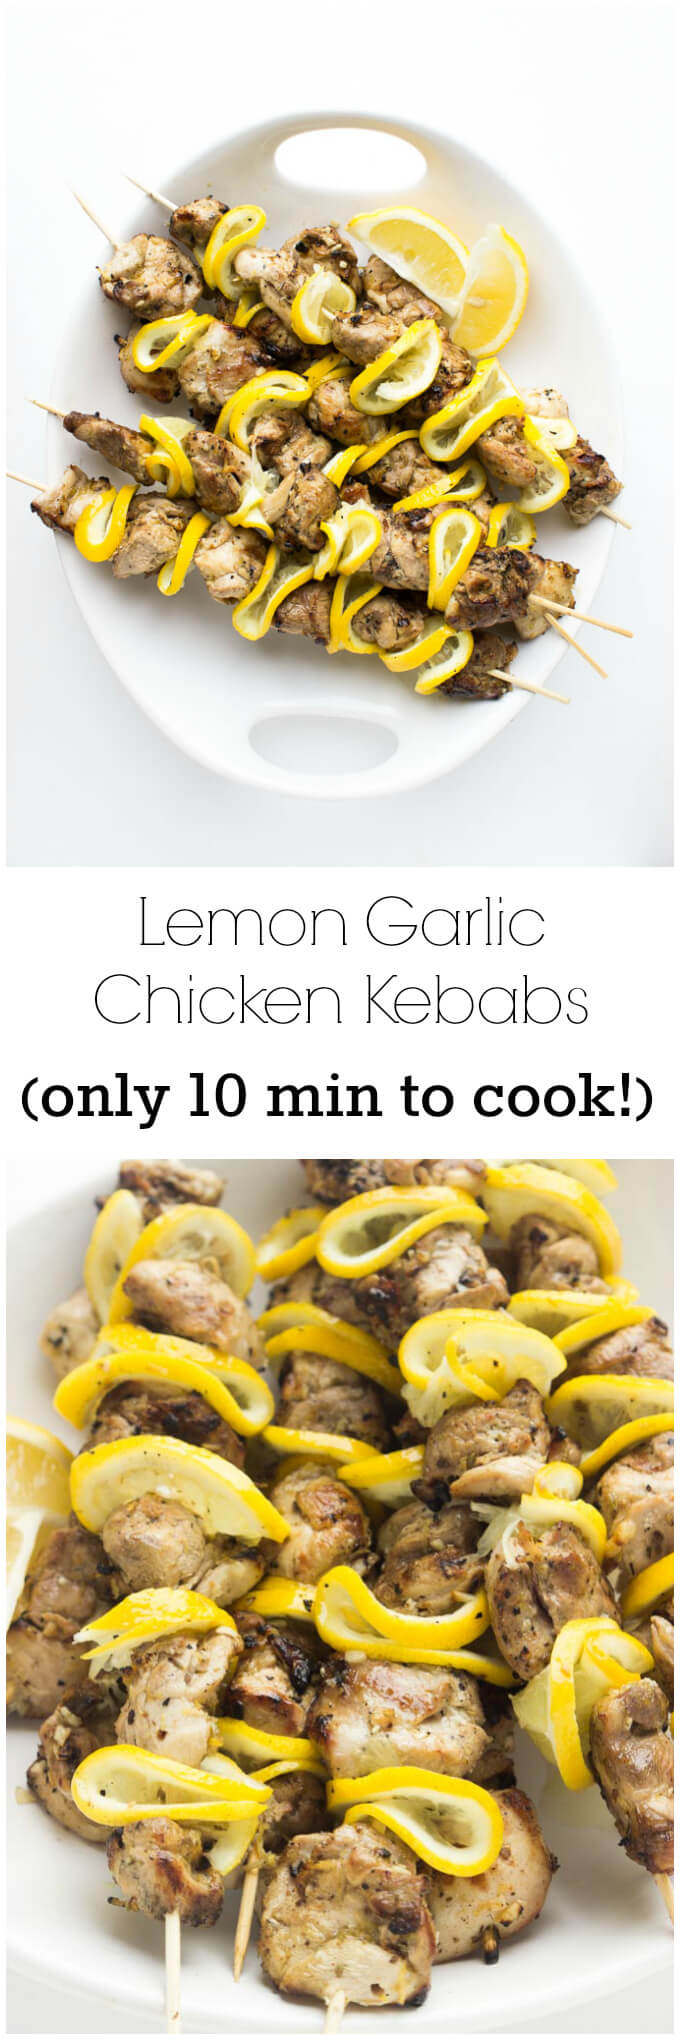 Quick and healthy chicken dinner that takes only 10 minutes to cook with pantry staple ingredients | littlebroken.com @littlebroken